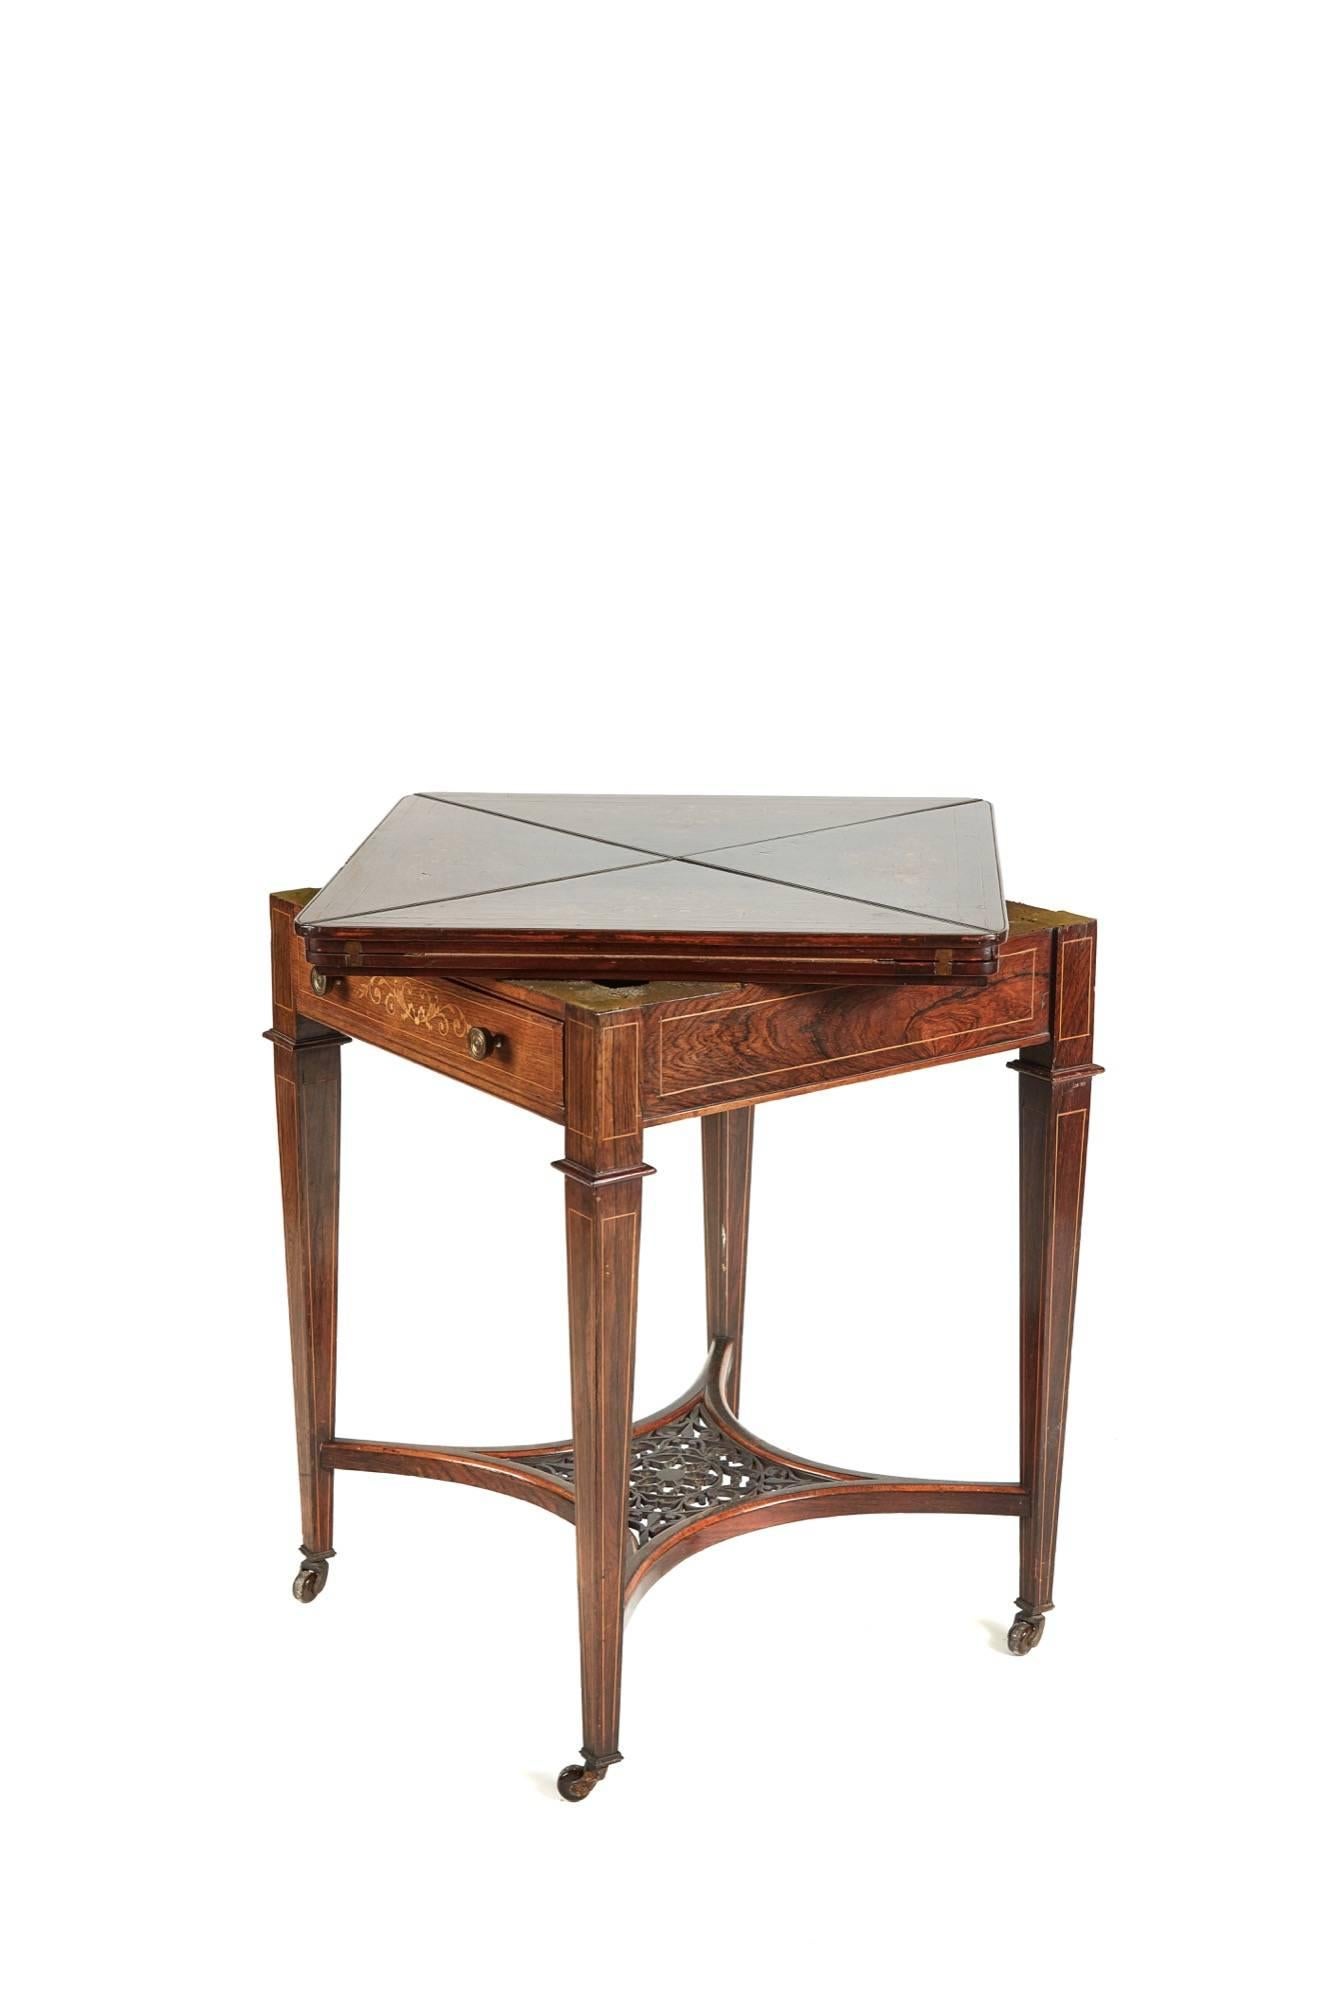 A rosewood and marquetry inlaid envelope card table, the fold-over top opening to reveal baize lined playing surface above a frieze drawer, the platform under tier with fret carved centre section, inlaid square tapering legs with original